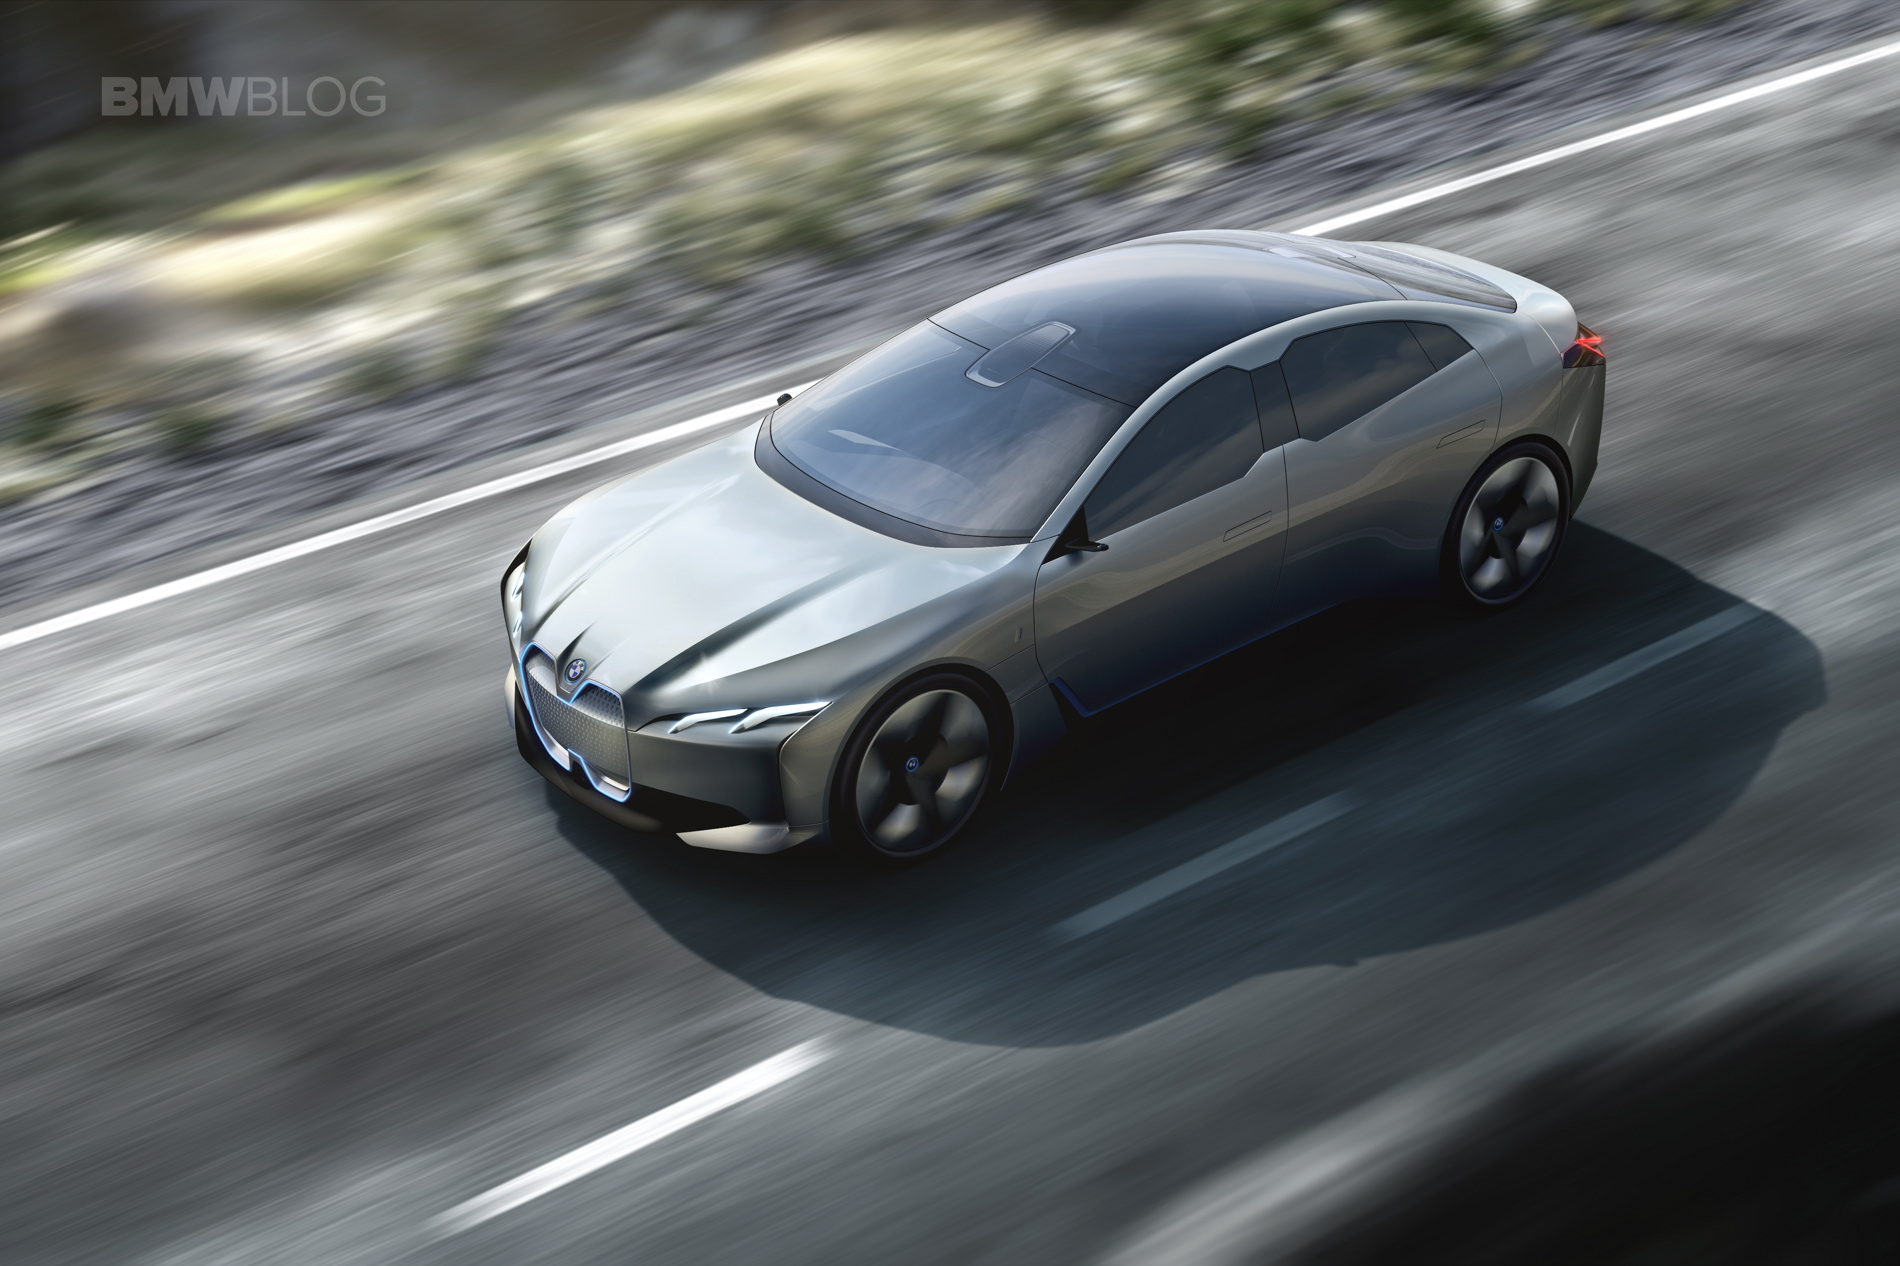 Rumor: New BMW i4 – Rear-wheel and all-wheel drive, 60 and 80 kWh battery packs